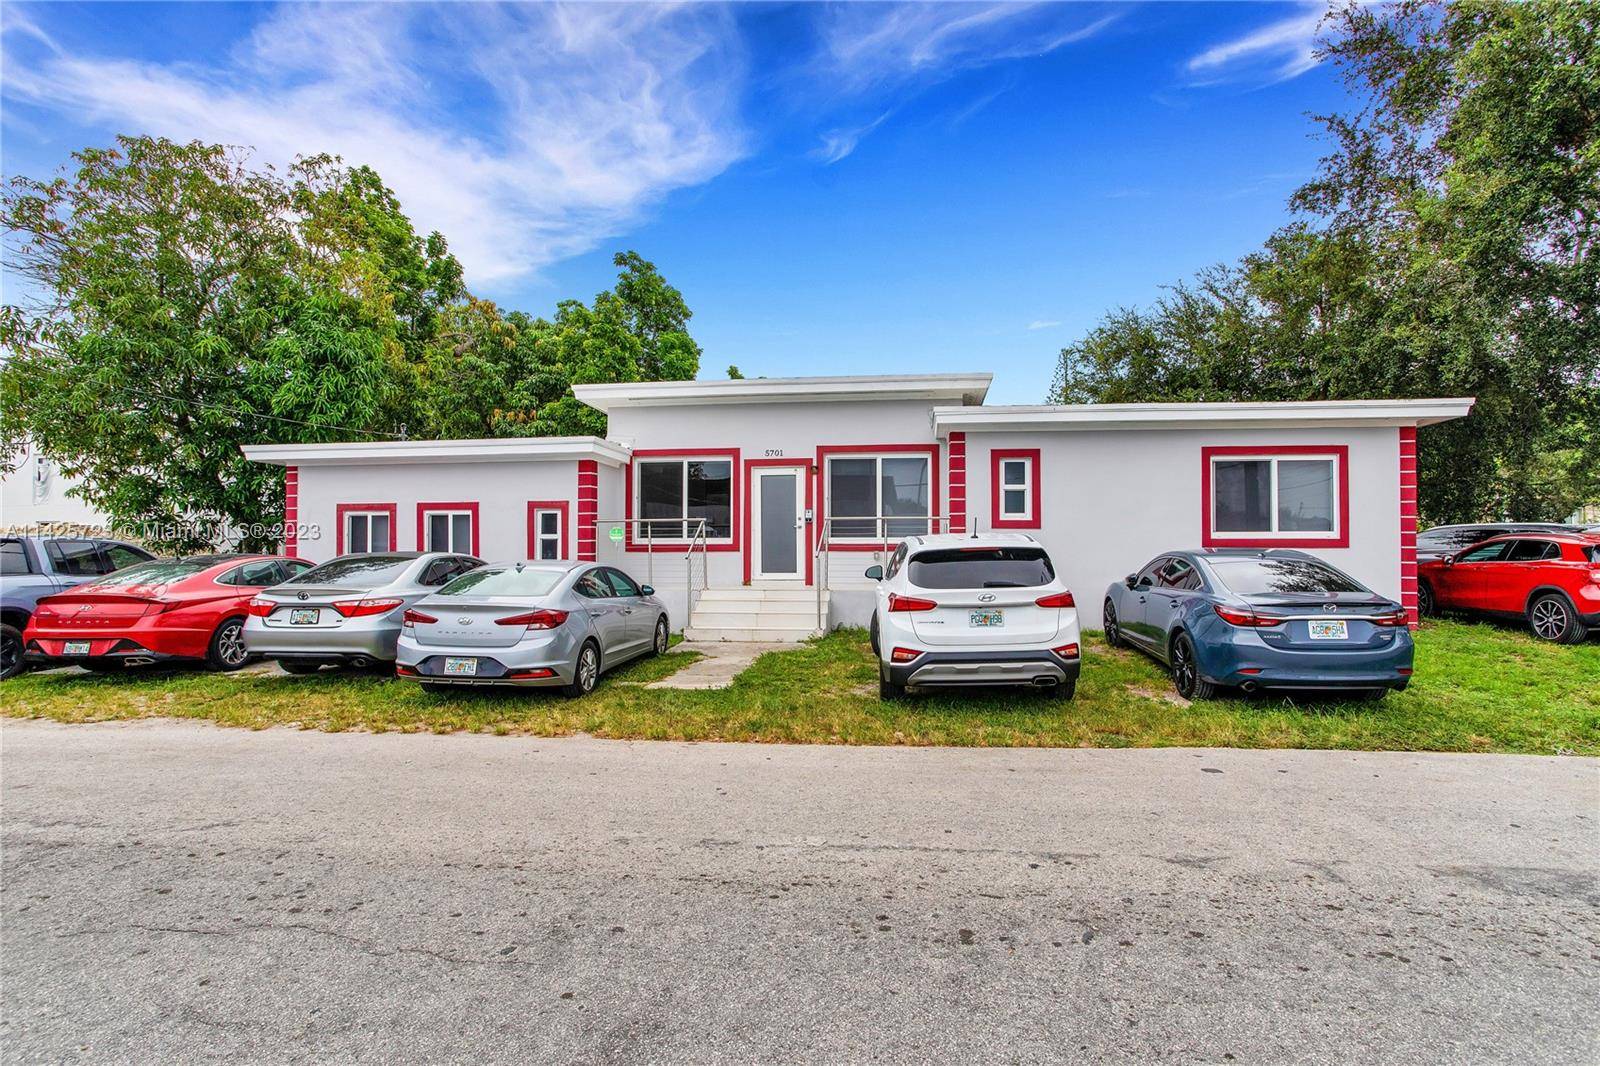 This spacious MiMo house has been designated a Commercial space and is centrally located one block from NE 2nd Ave with lots of parking spaces.